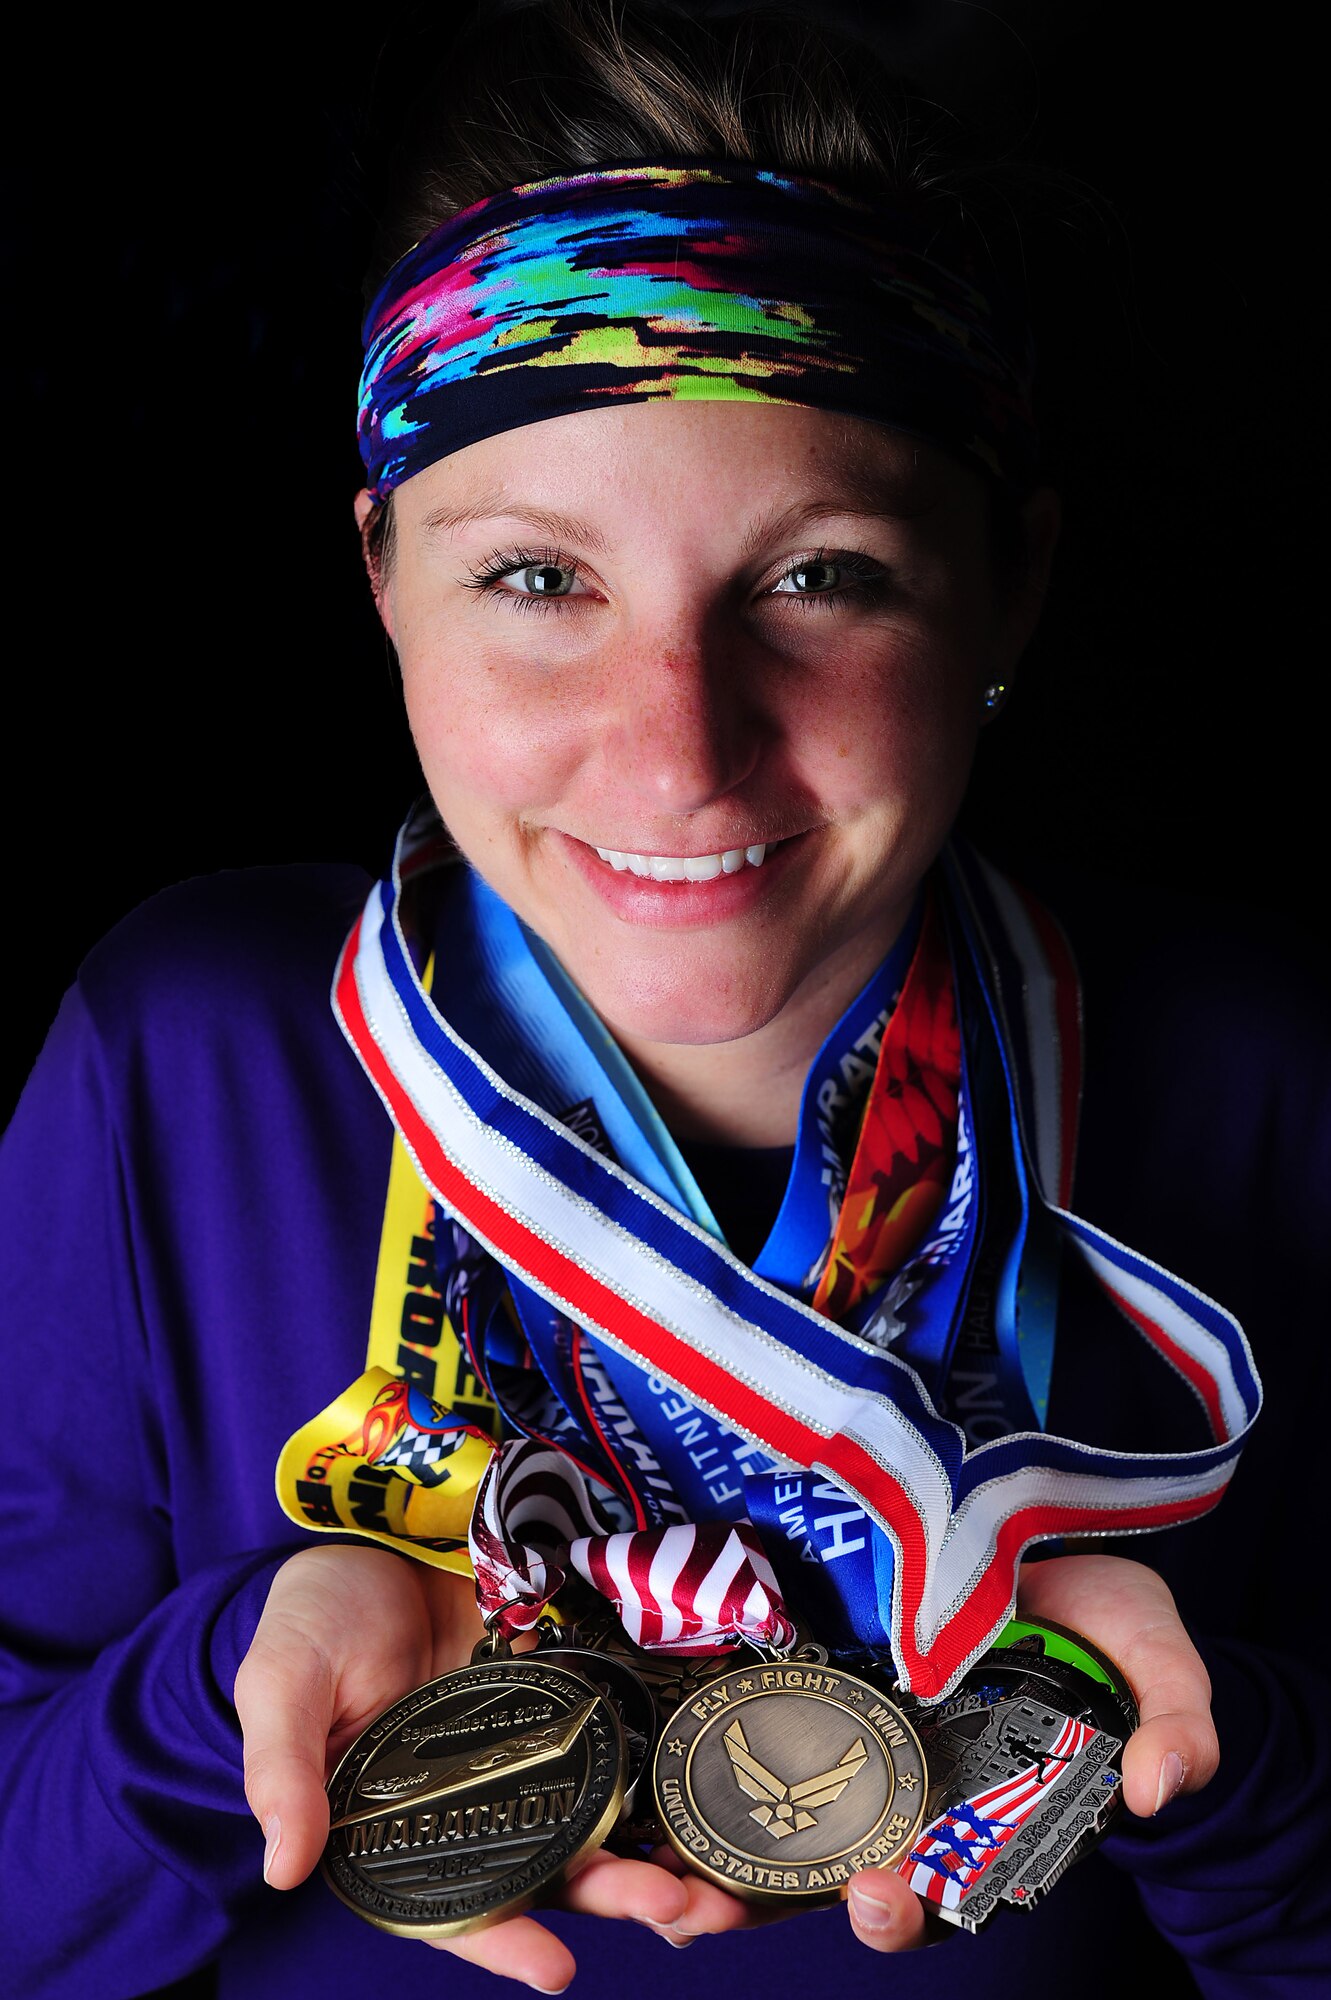 U.S. Air Force 2nd Lieutenant Abigail Webber, 633rd Inpatient Squadron labor and delivery nurse, dons medals from past half and full marathons, Nov. 19, 2014, at Langley Air Force Base, Va.  Webber started running after her sister joined a cross country team, and since then, it has become a family activity. Both Webber and her sister, Holly, have ran half and full marathons with their father, retired U.S. Air Force Col. (Dr.) Gary Frederickson. (U.S. Air Force photo by Staff Sgt. Natasha Stannard/Released)  